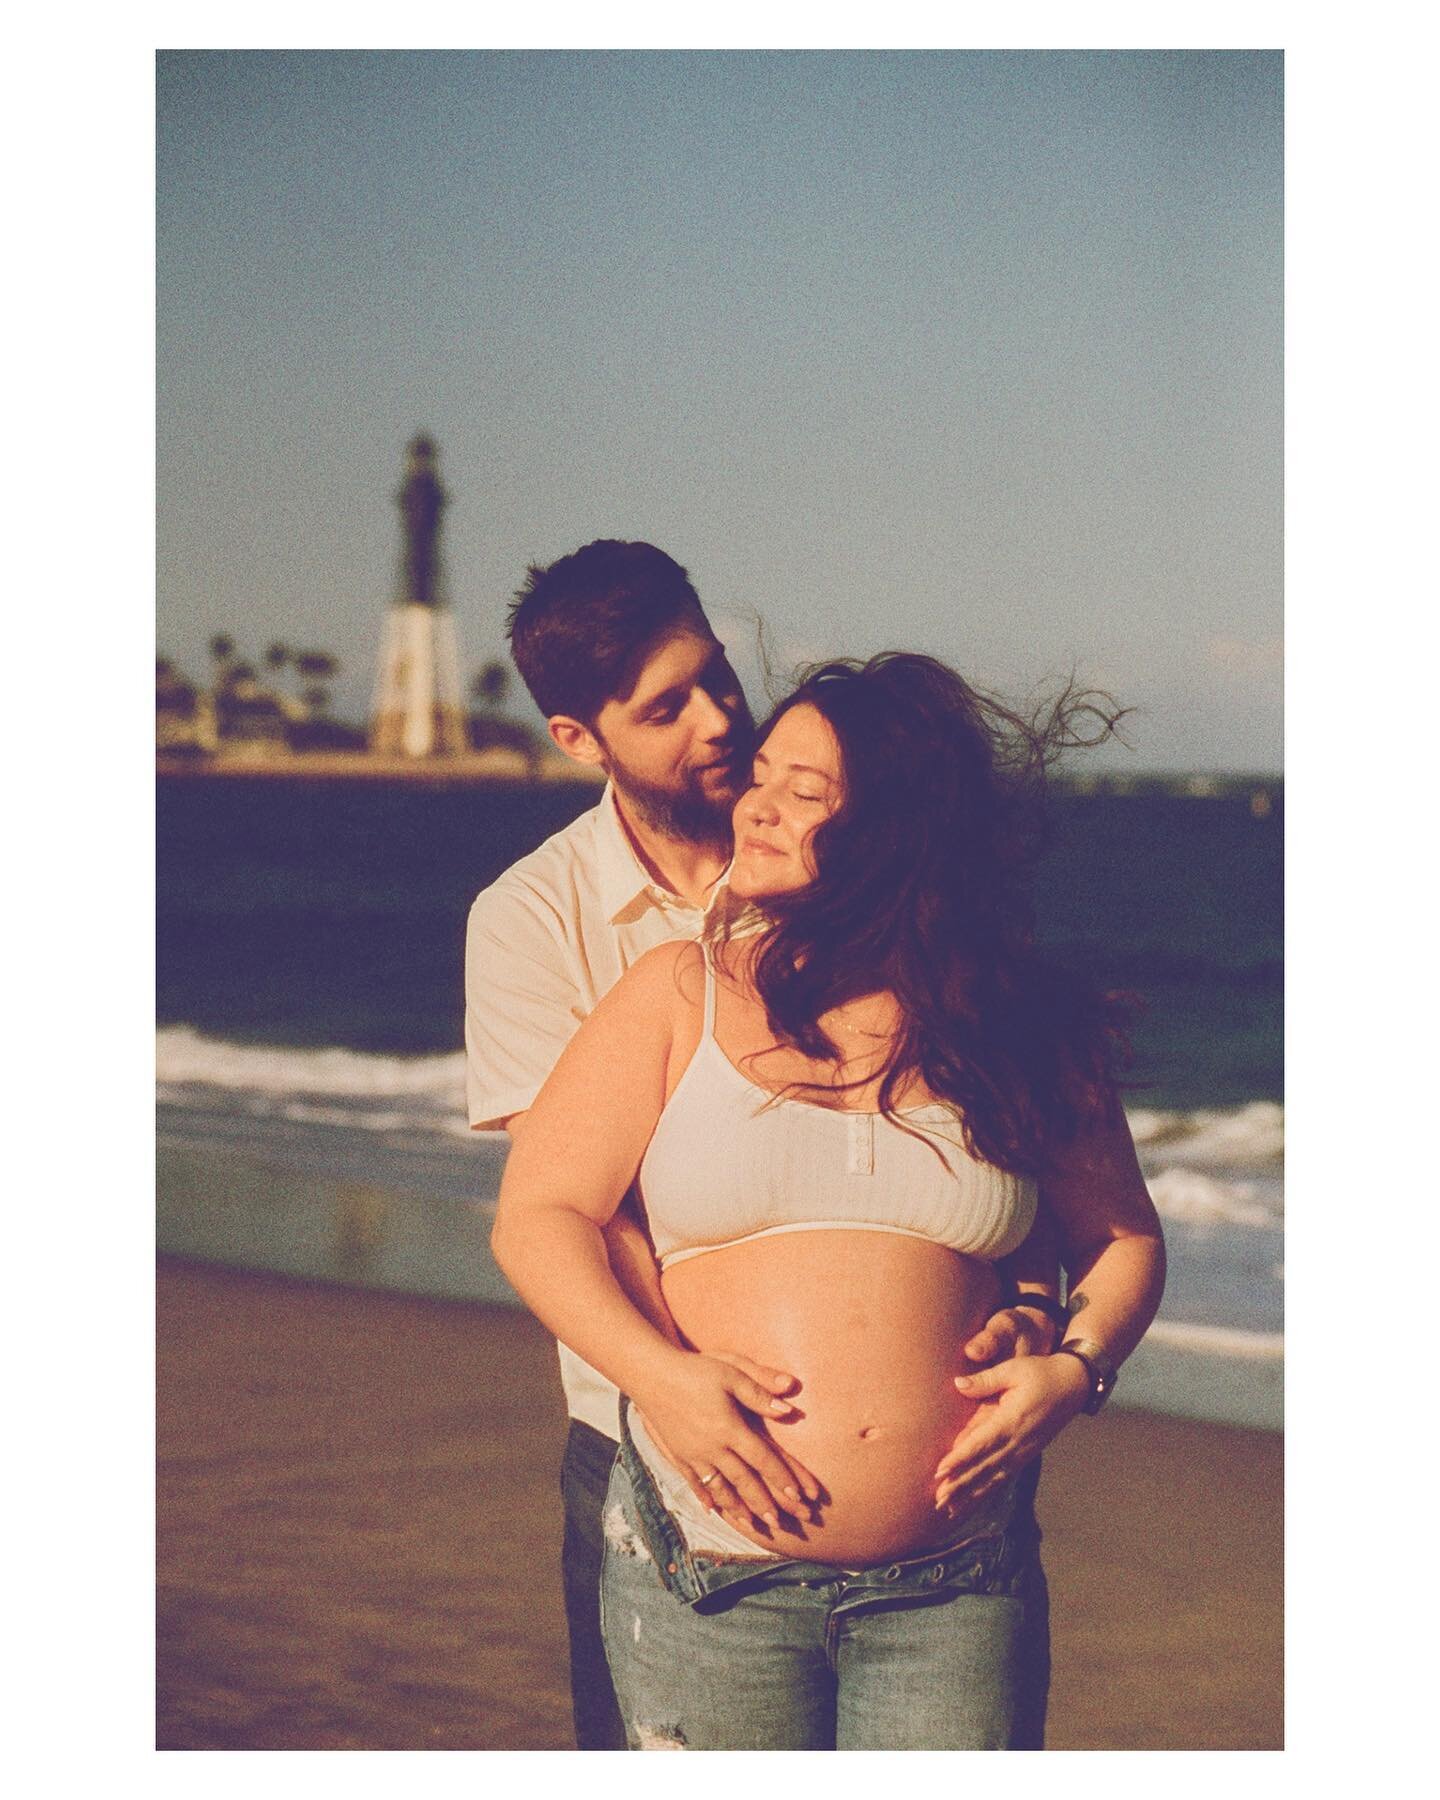 🎞️ Bobby &amp; Emily, Maternity Shoot - Shot on Phoenix 200, 35mm Film 

Now offering 35mm film as an add-on for most photoshoots&hellip;. Couples, weddings, etc. Send me a message for more info ℹ️ 

#phoneix200 #phoneixfilm #35mmfilm #maternity #ma